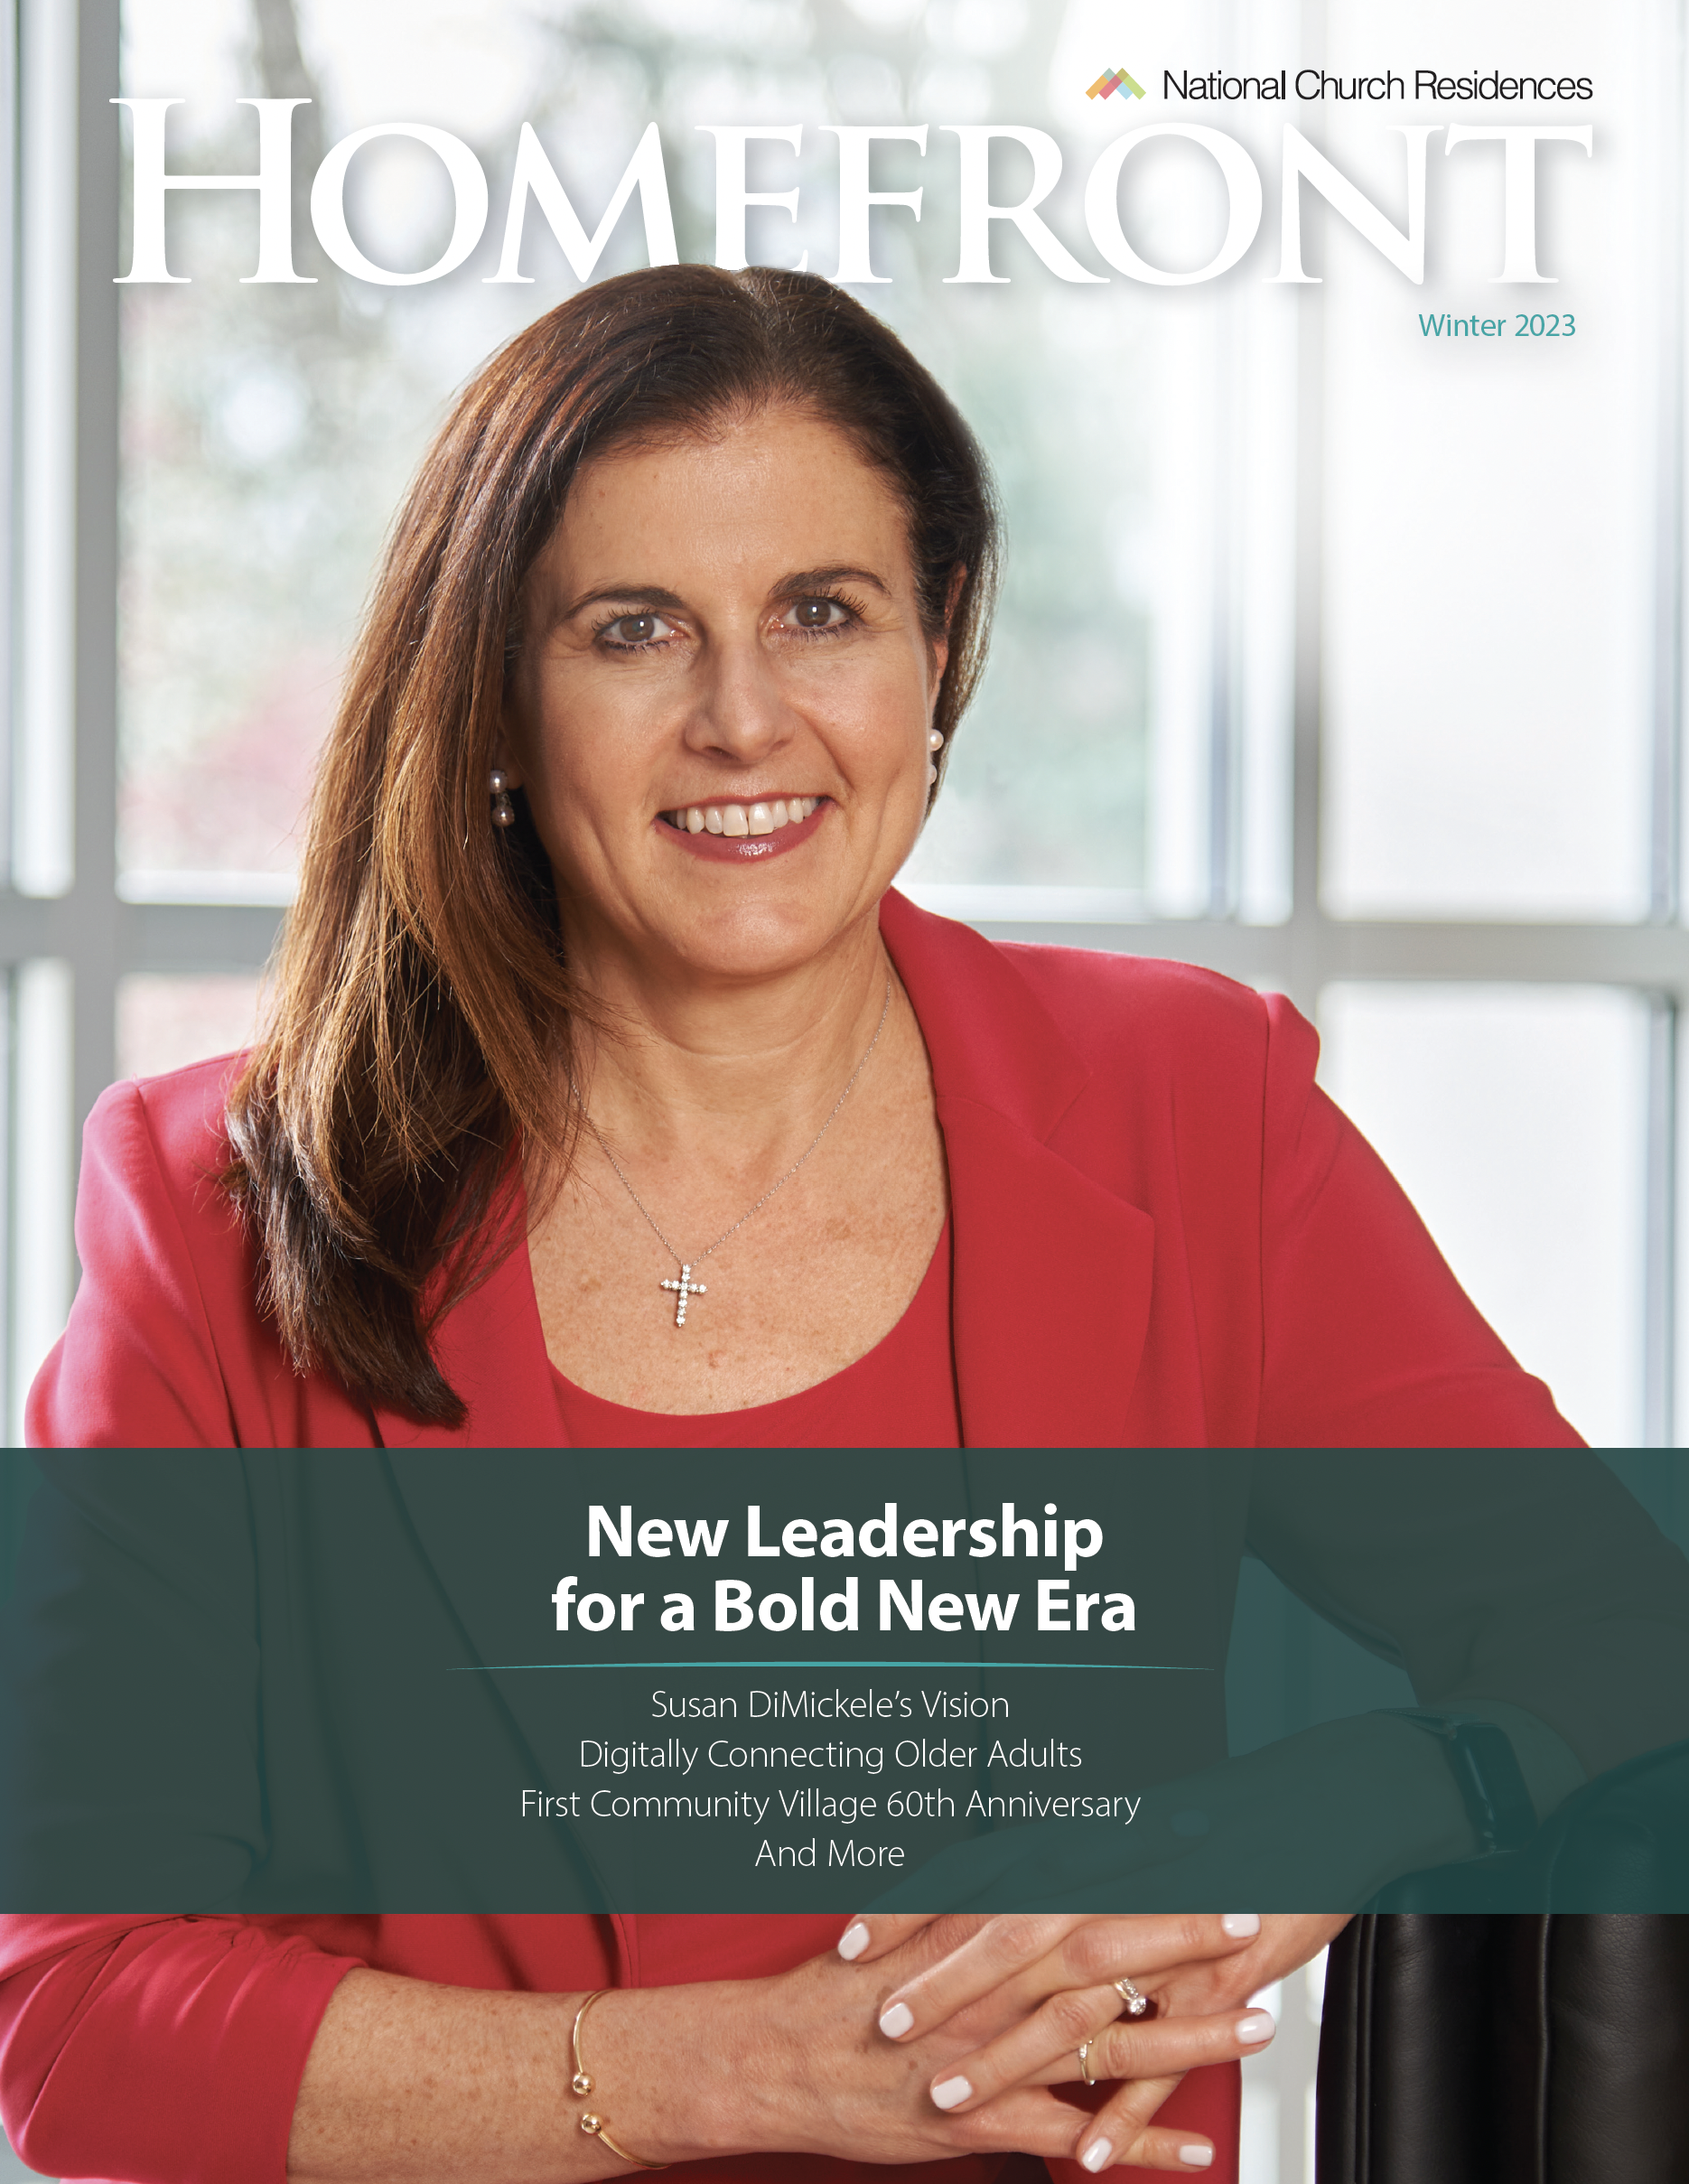 National Church Residences CEO, Susan DiMickele on the cover of Homefront Magazine.